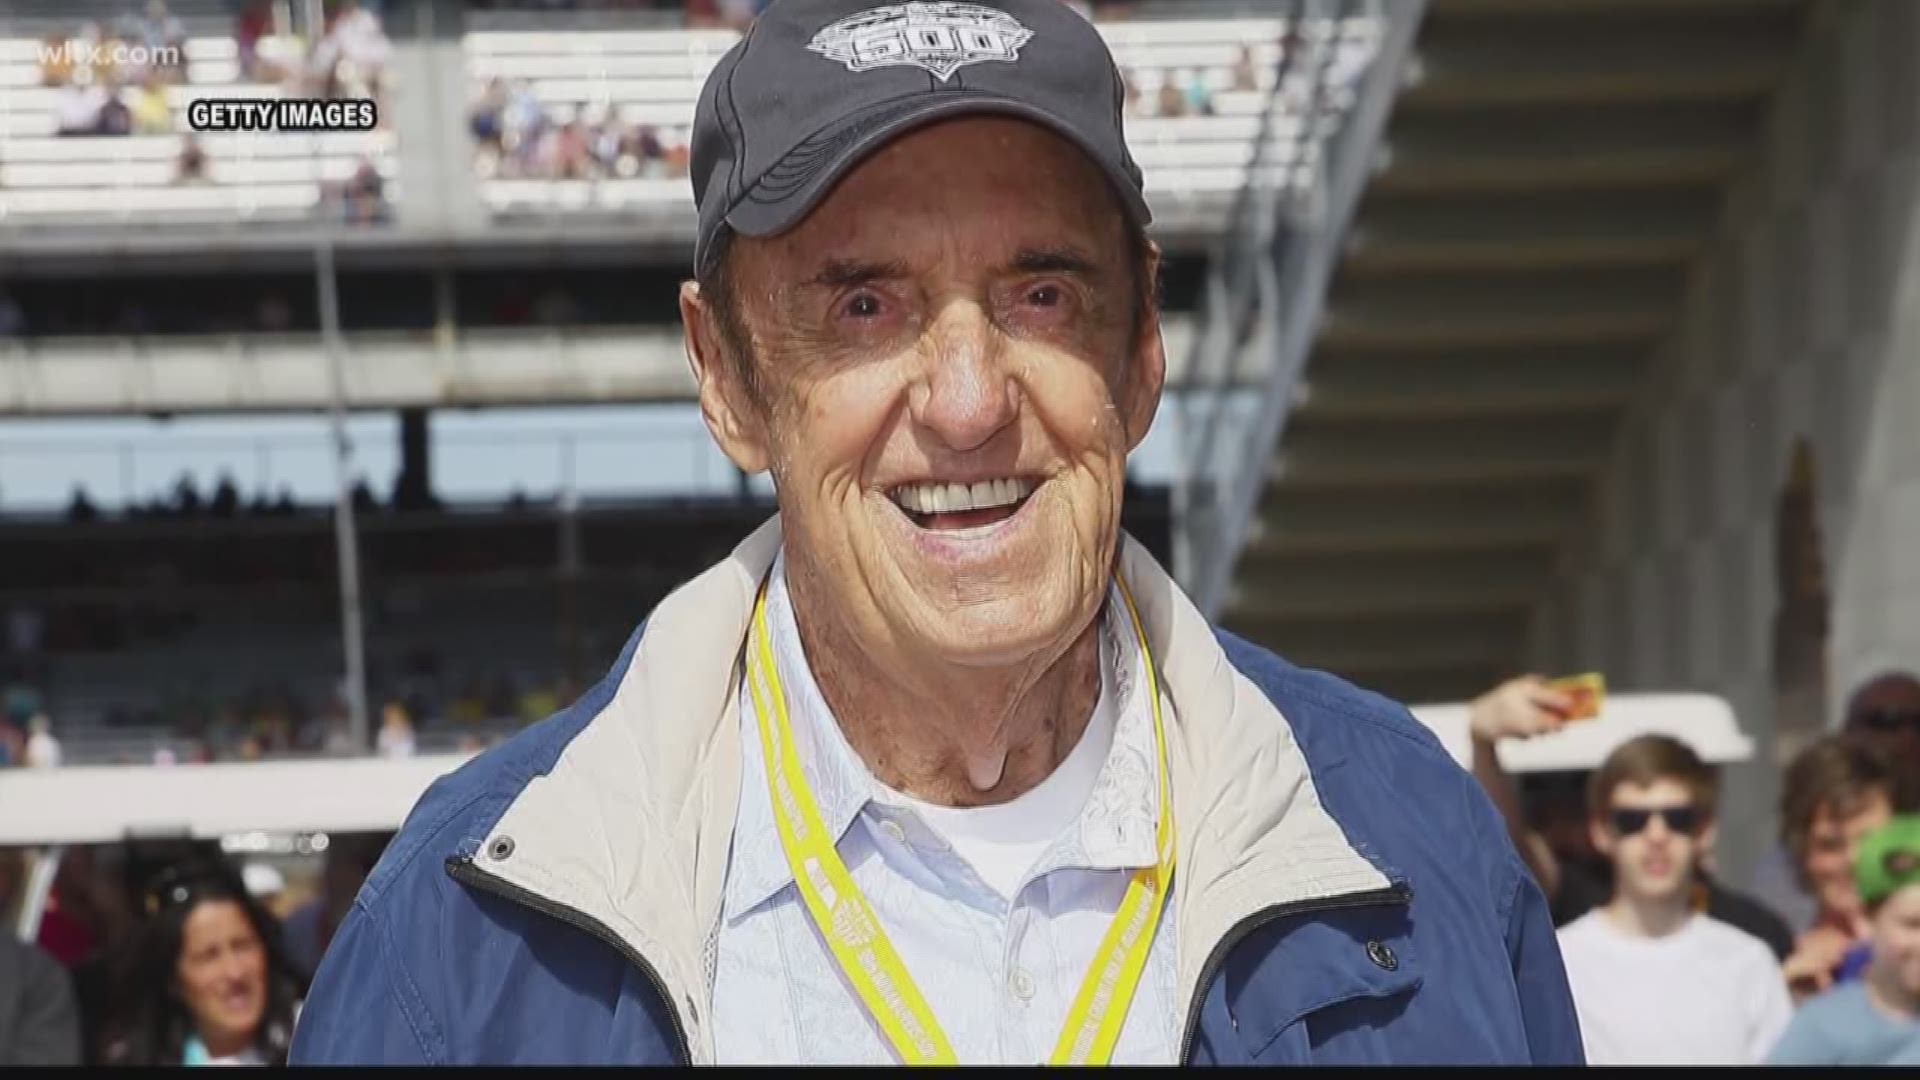 Jim Nabors, who created one of TV's beloved comedic characters, Gomer Pyle, died Thursday in Hawaii at the age of 87, reports Hawaii News Now and the Associated Press.